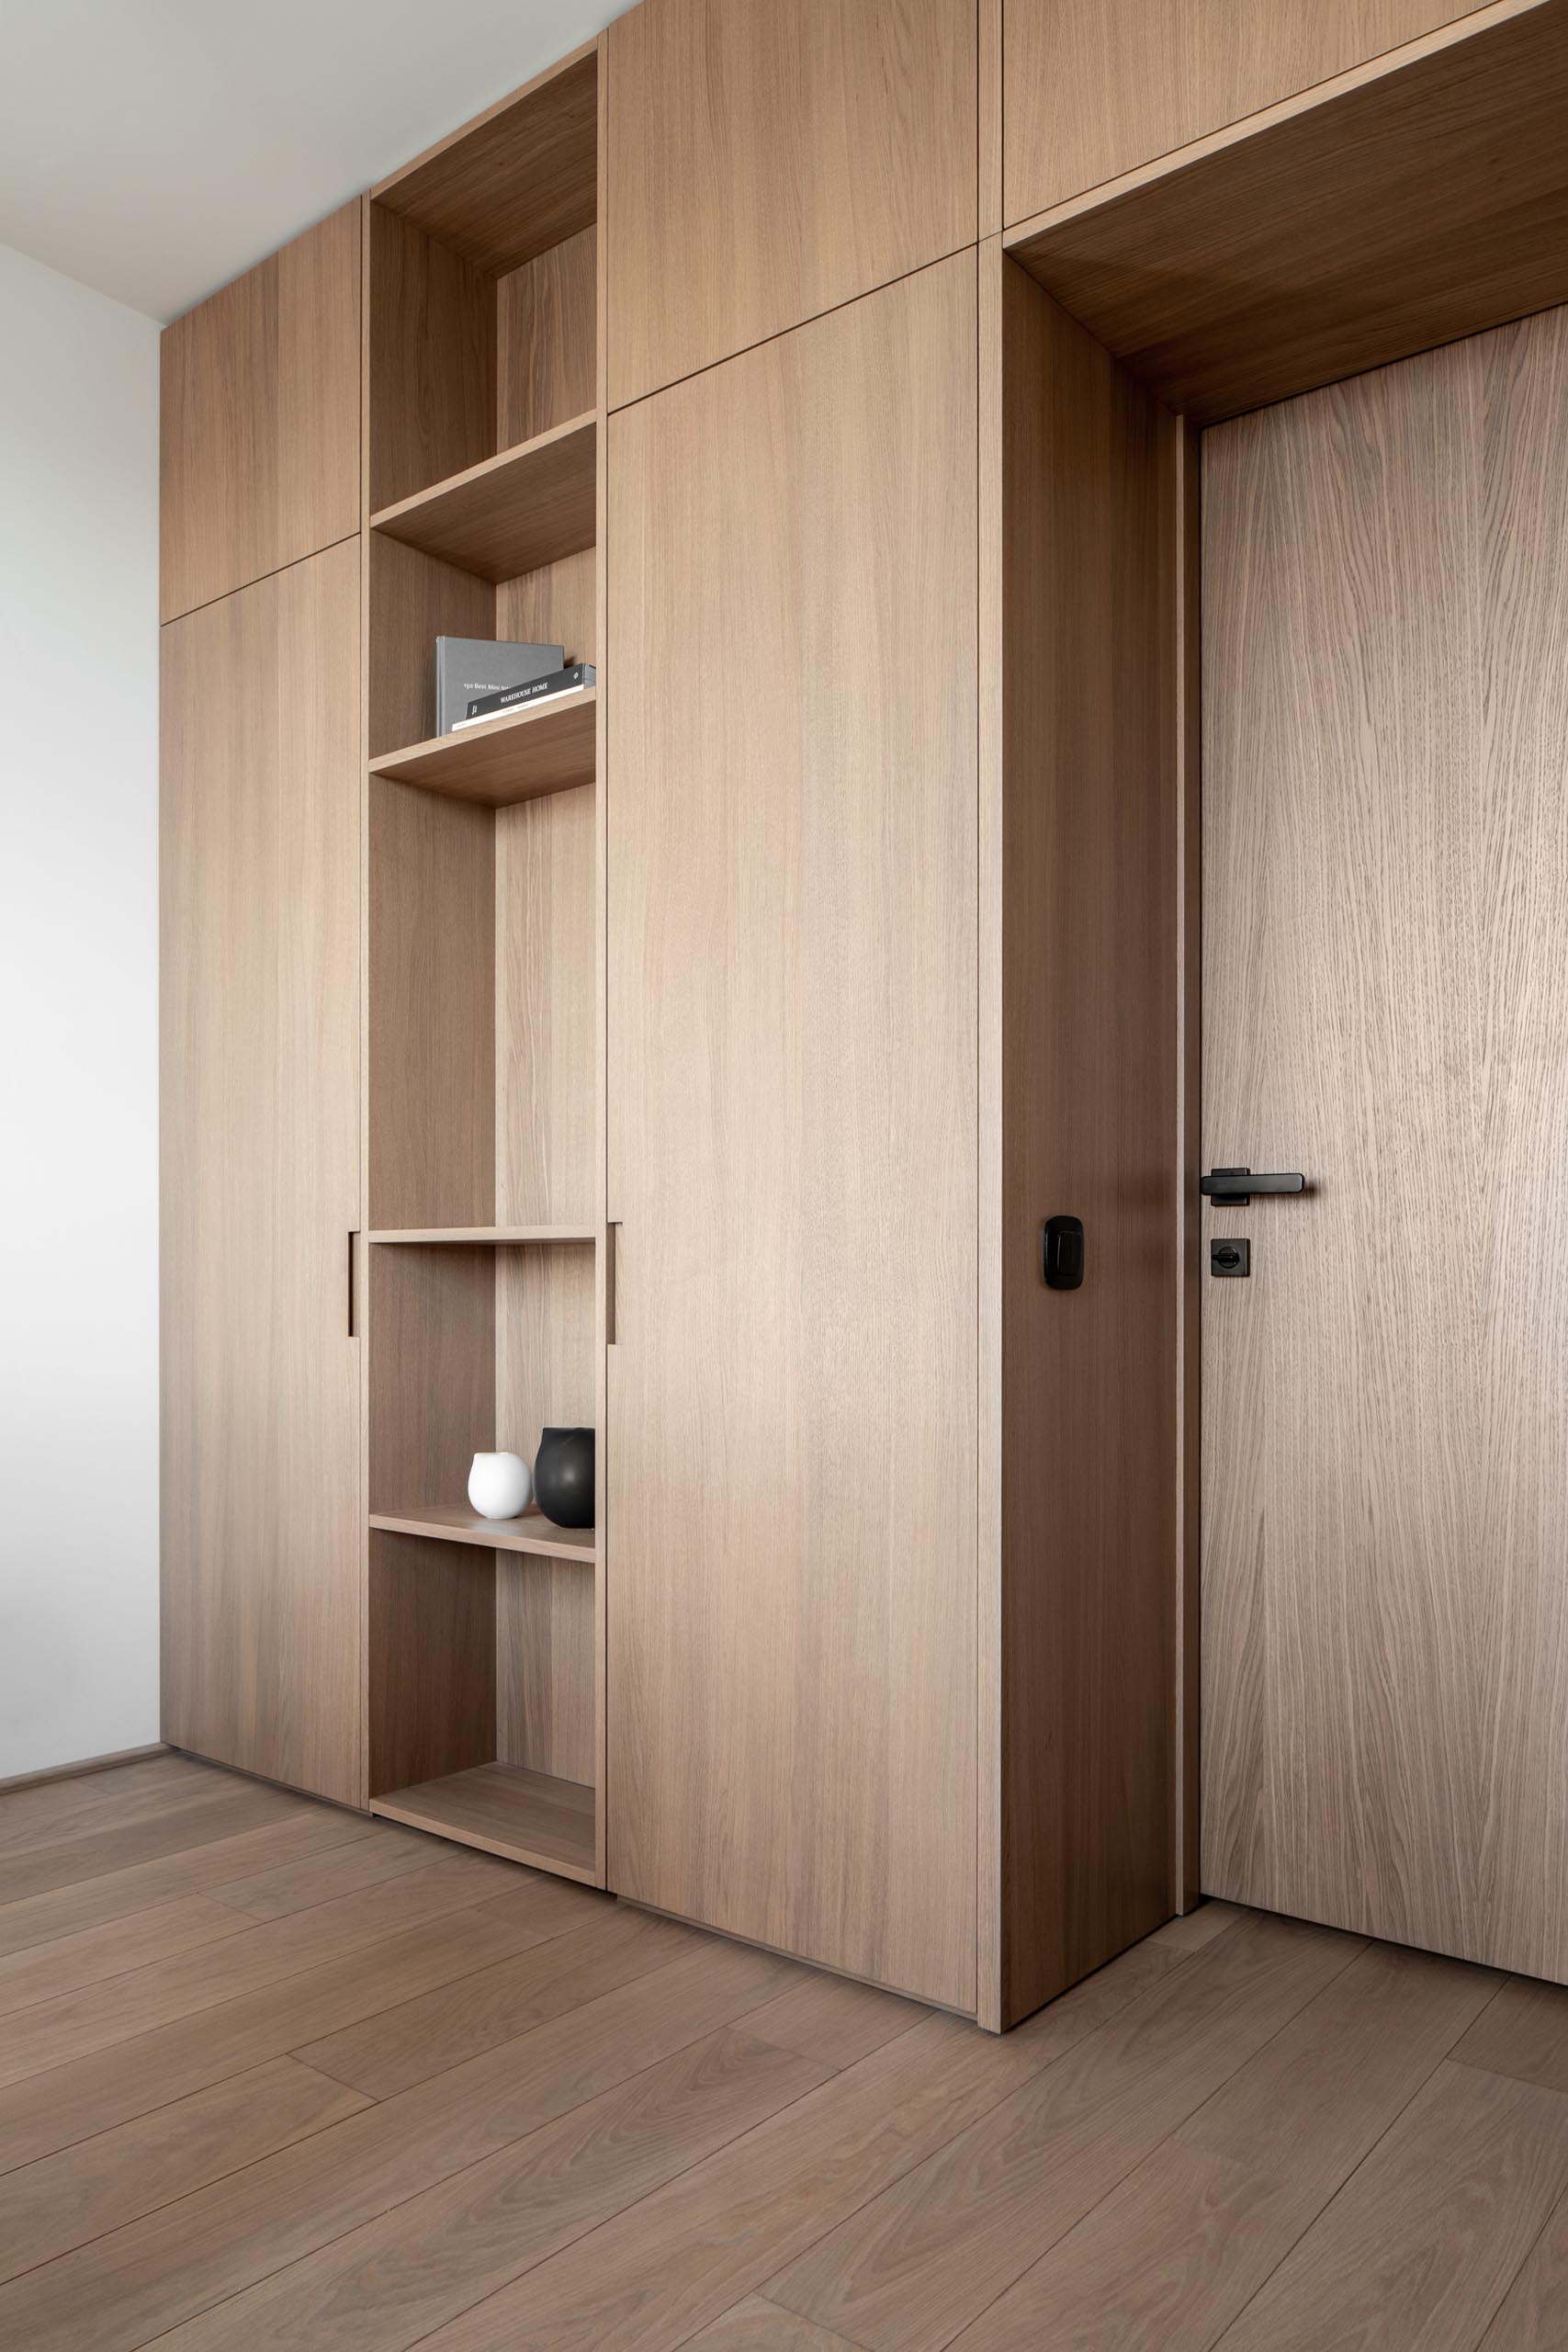 Modern wood shelving and cabinets that surround the door of a home office.